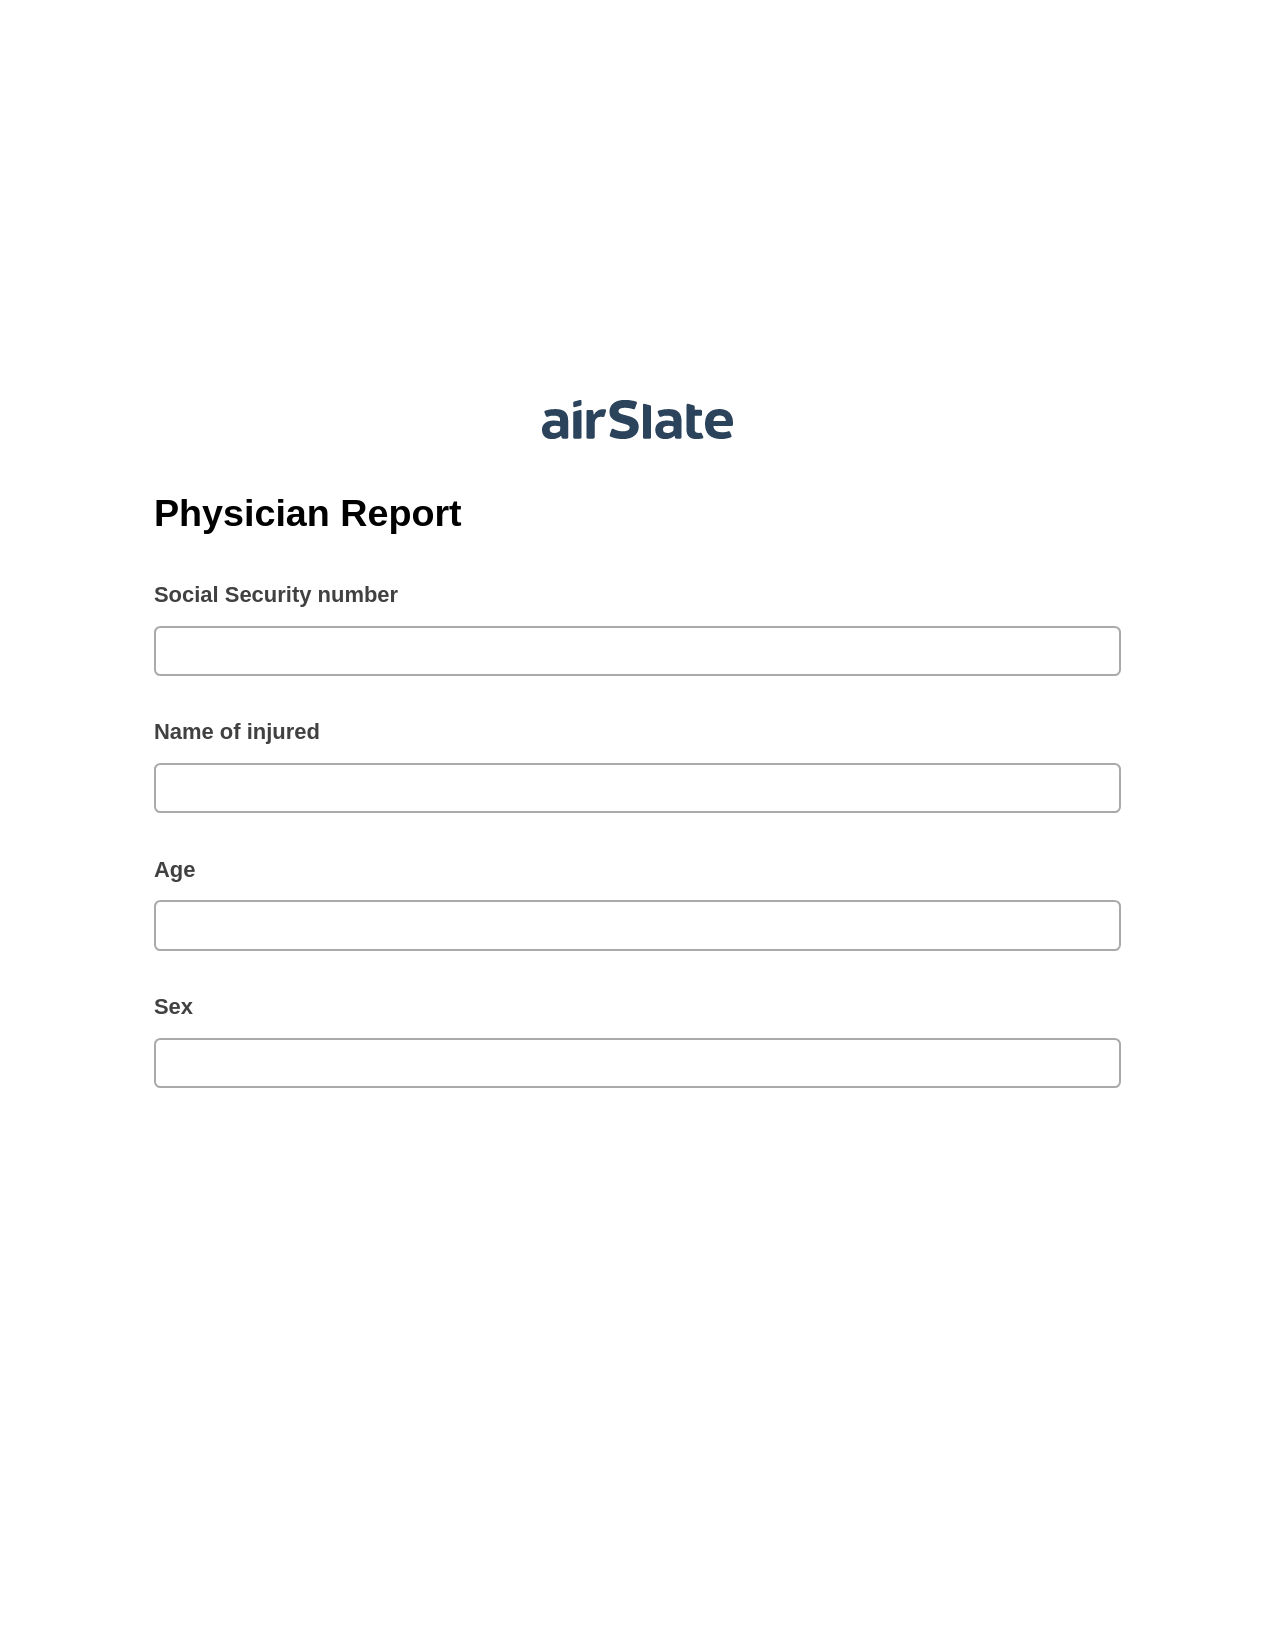 Multirole Physician Report Pre-fill Dropdowns from Airtable, Invoke Salesforce Process Bot, Post-finish Document Bot